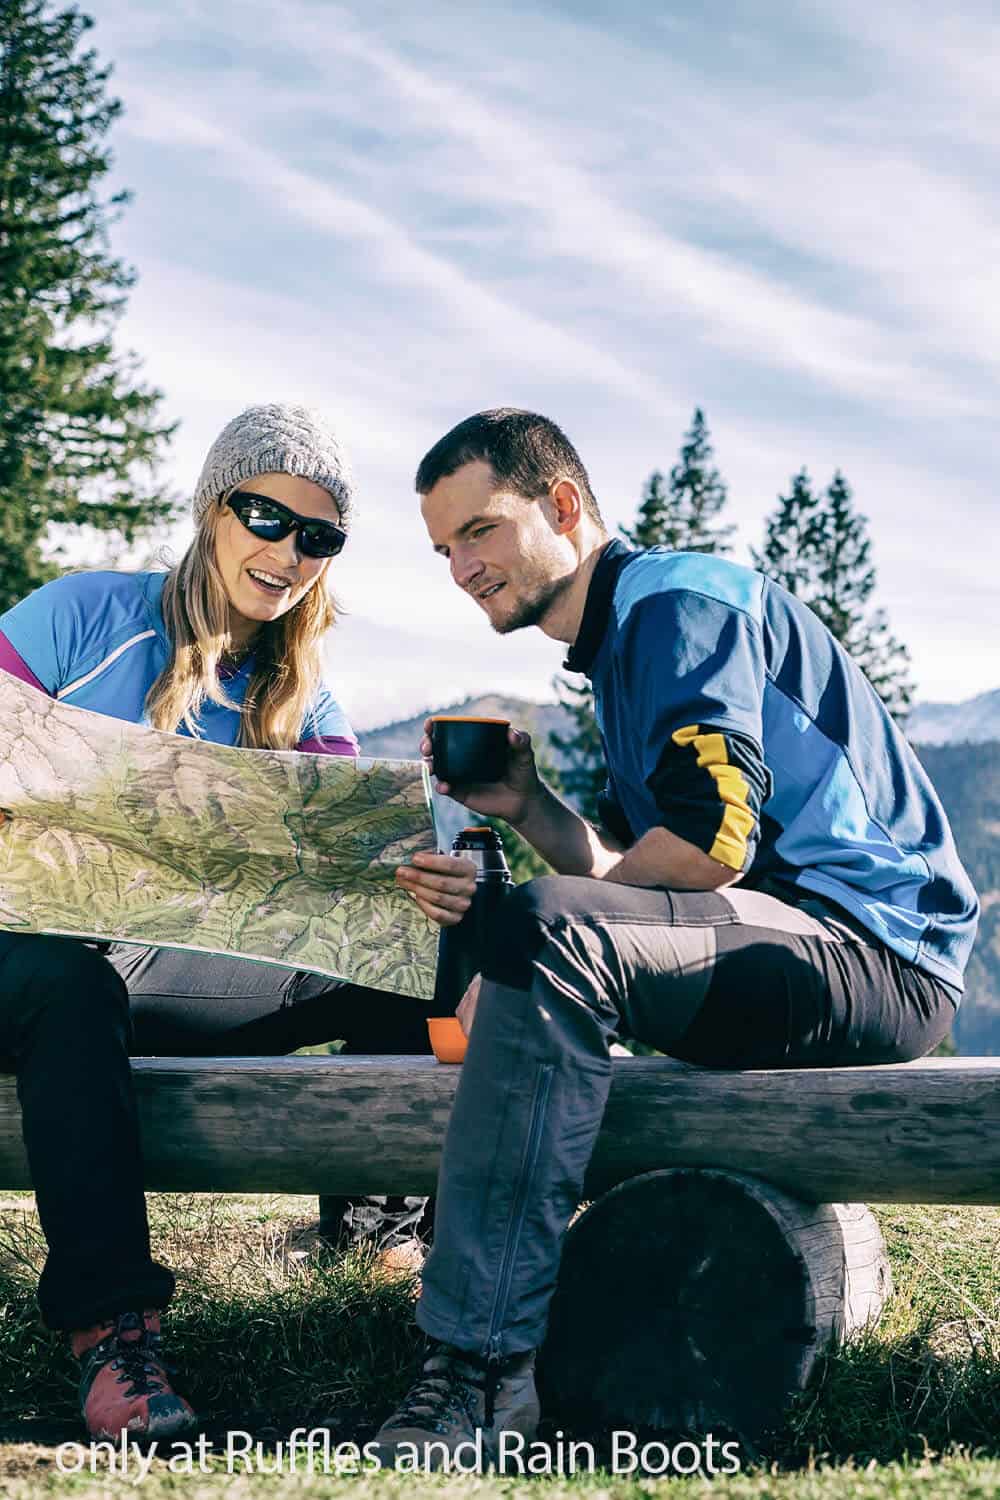 tips to plan a camping trip if you have never gone camping before